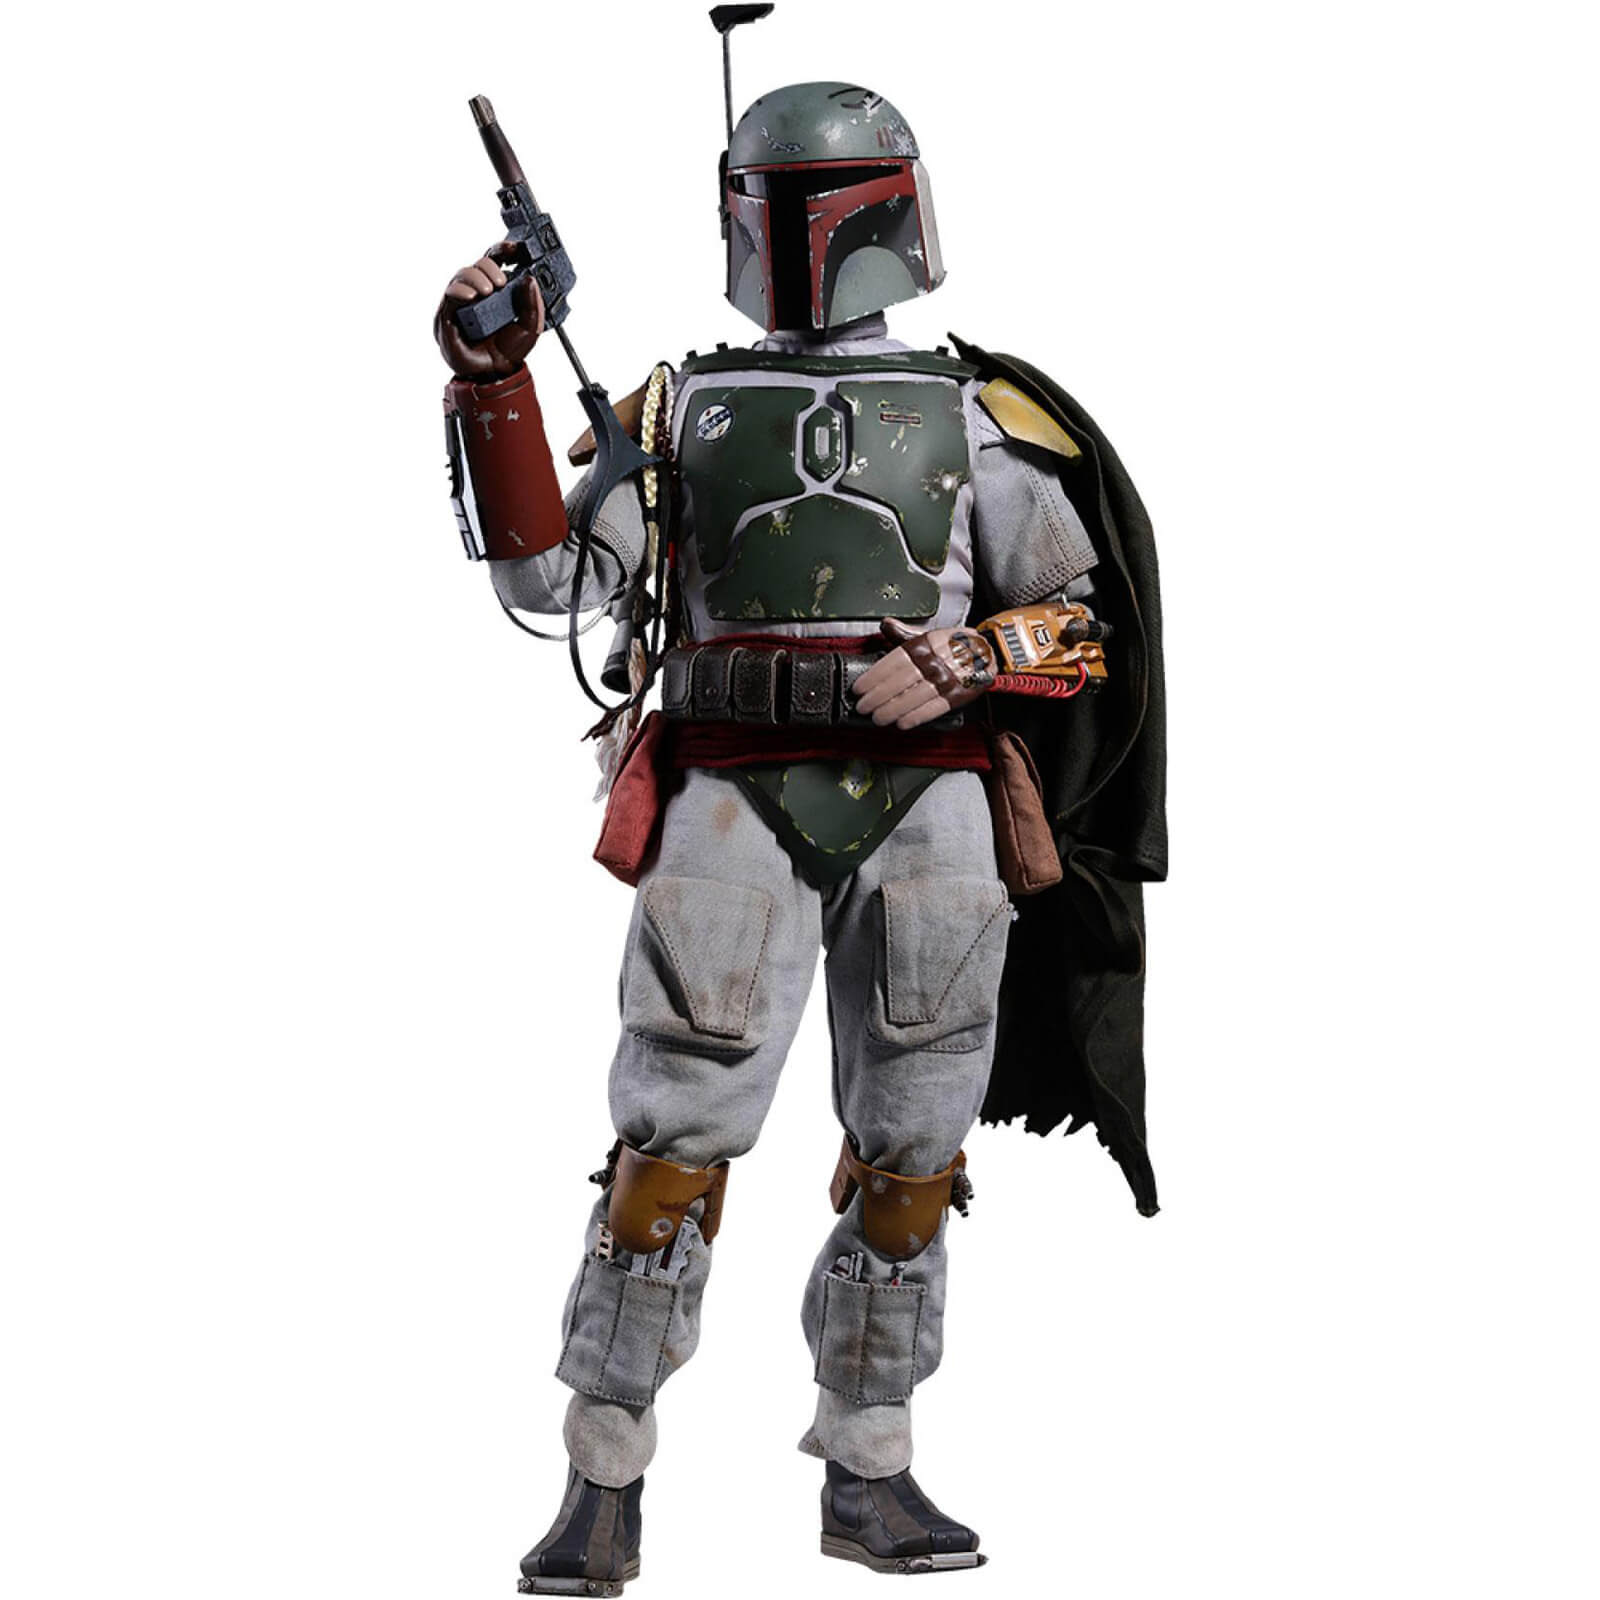 Hot Toys Star Wars: The Empire Strikes Back 40th Anniversary Collection Boba Fett 1/6 Scale Action Figure